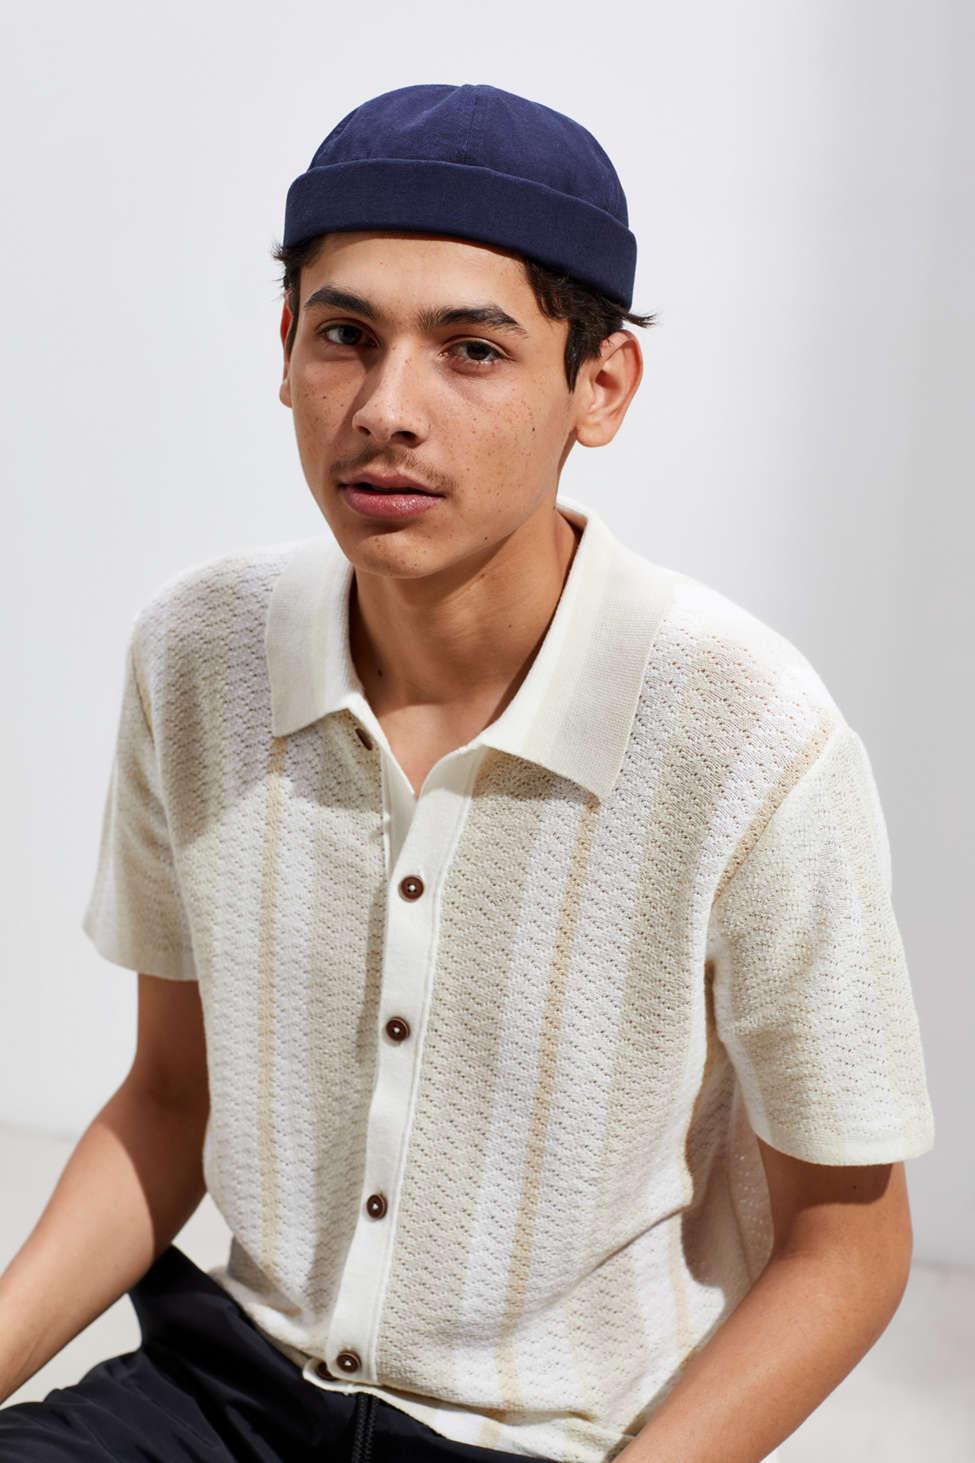 Urban Outfitters Cotton Uo Docker Hat in Blue for Men - Lyst